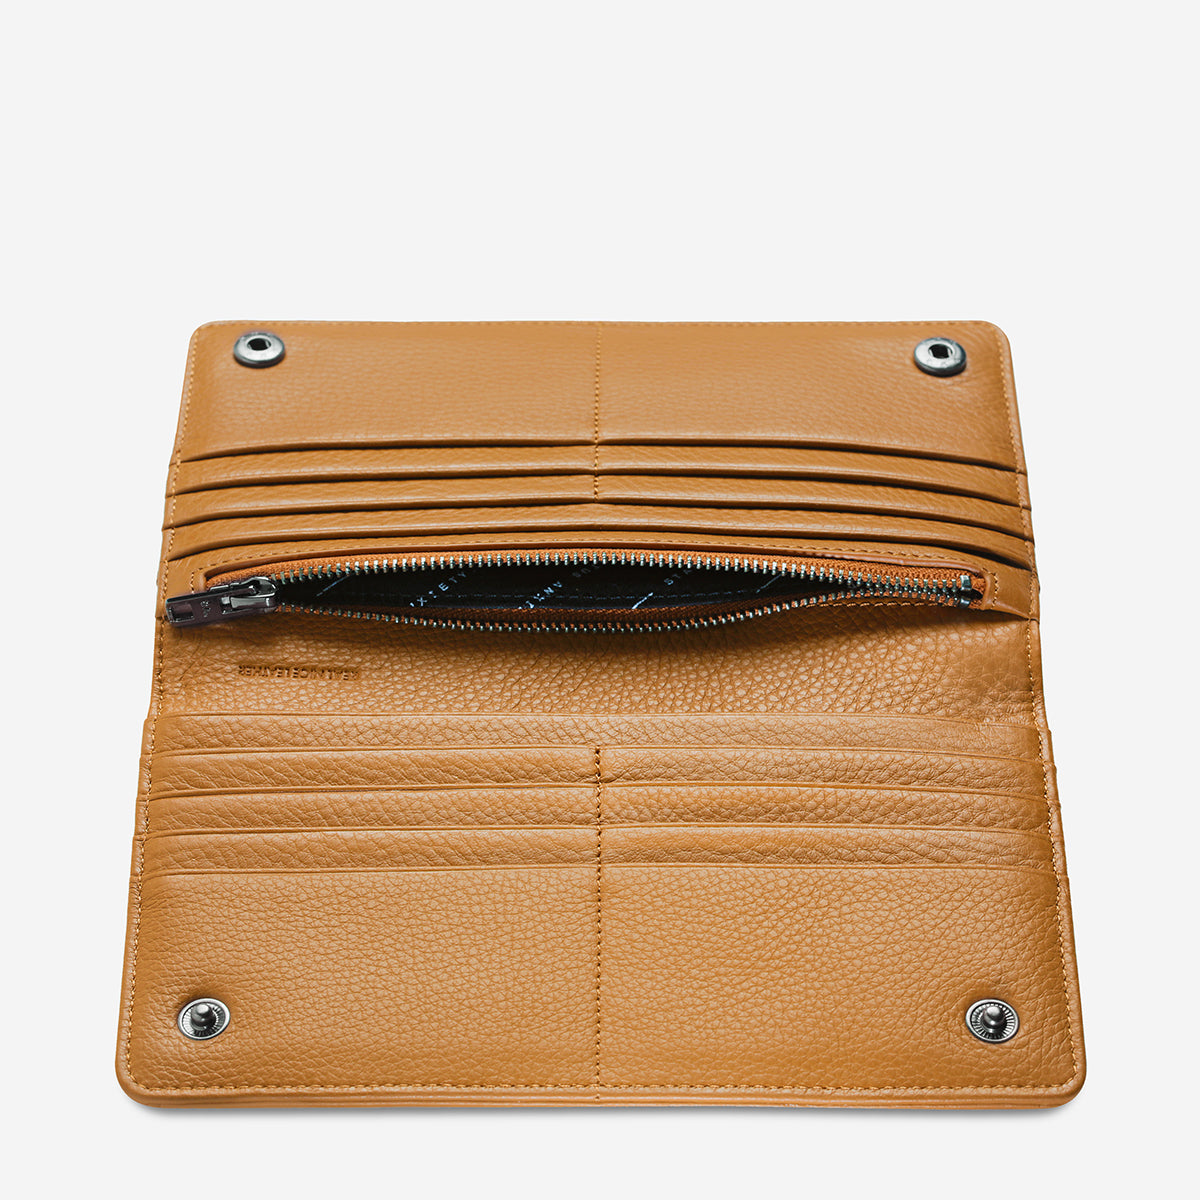 Living Proof Leather Wallet